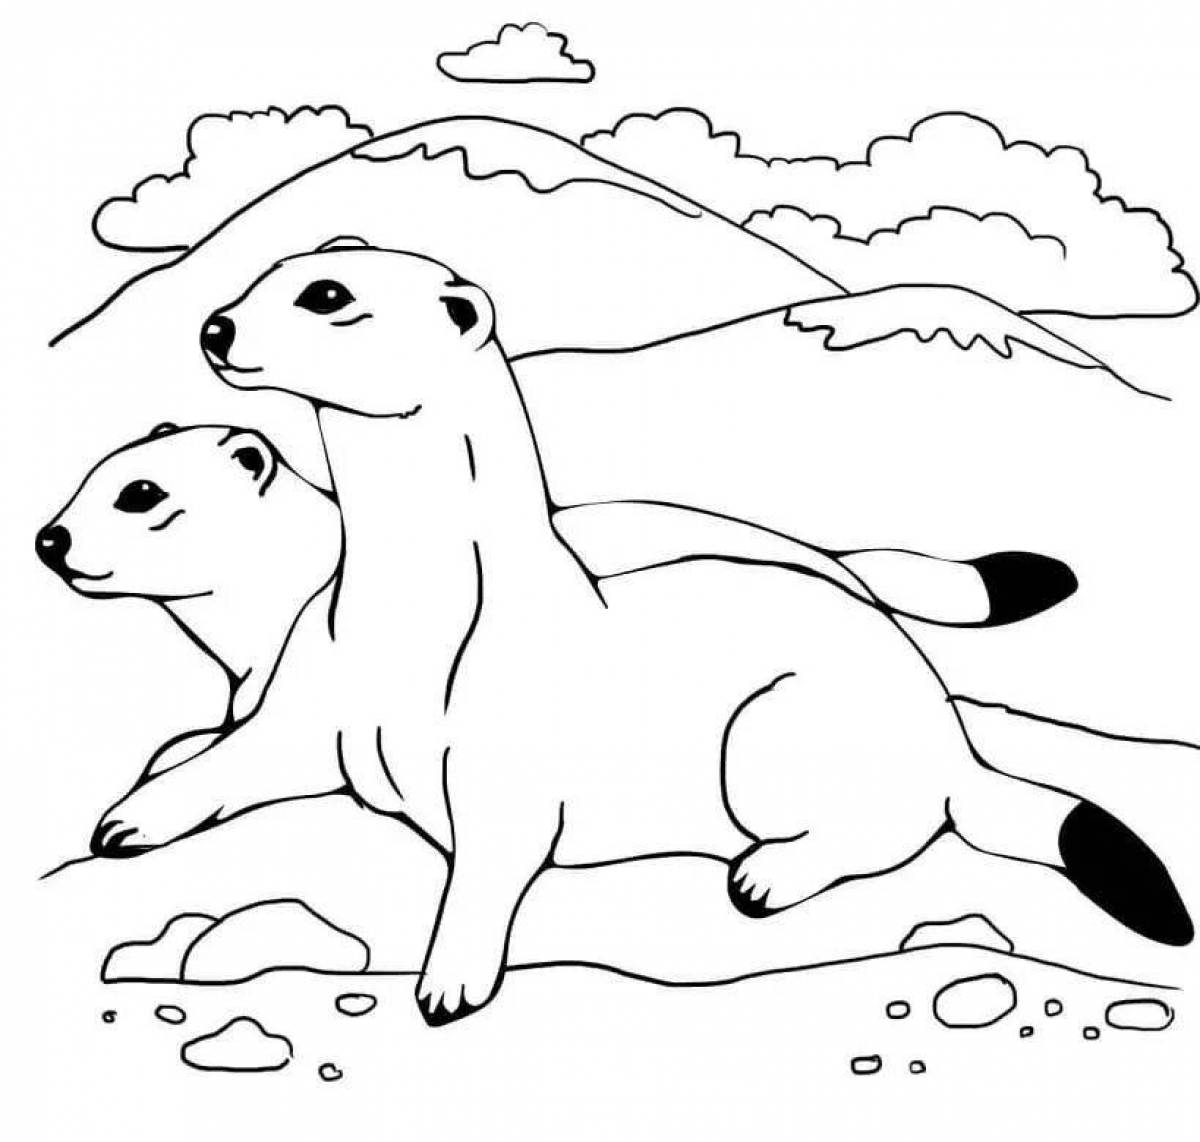 Coloring page dazzling weasel